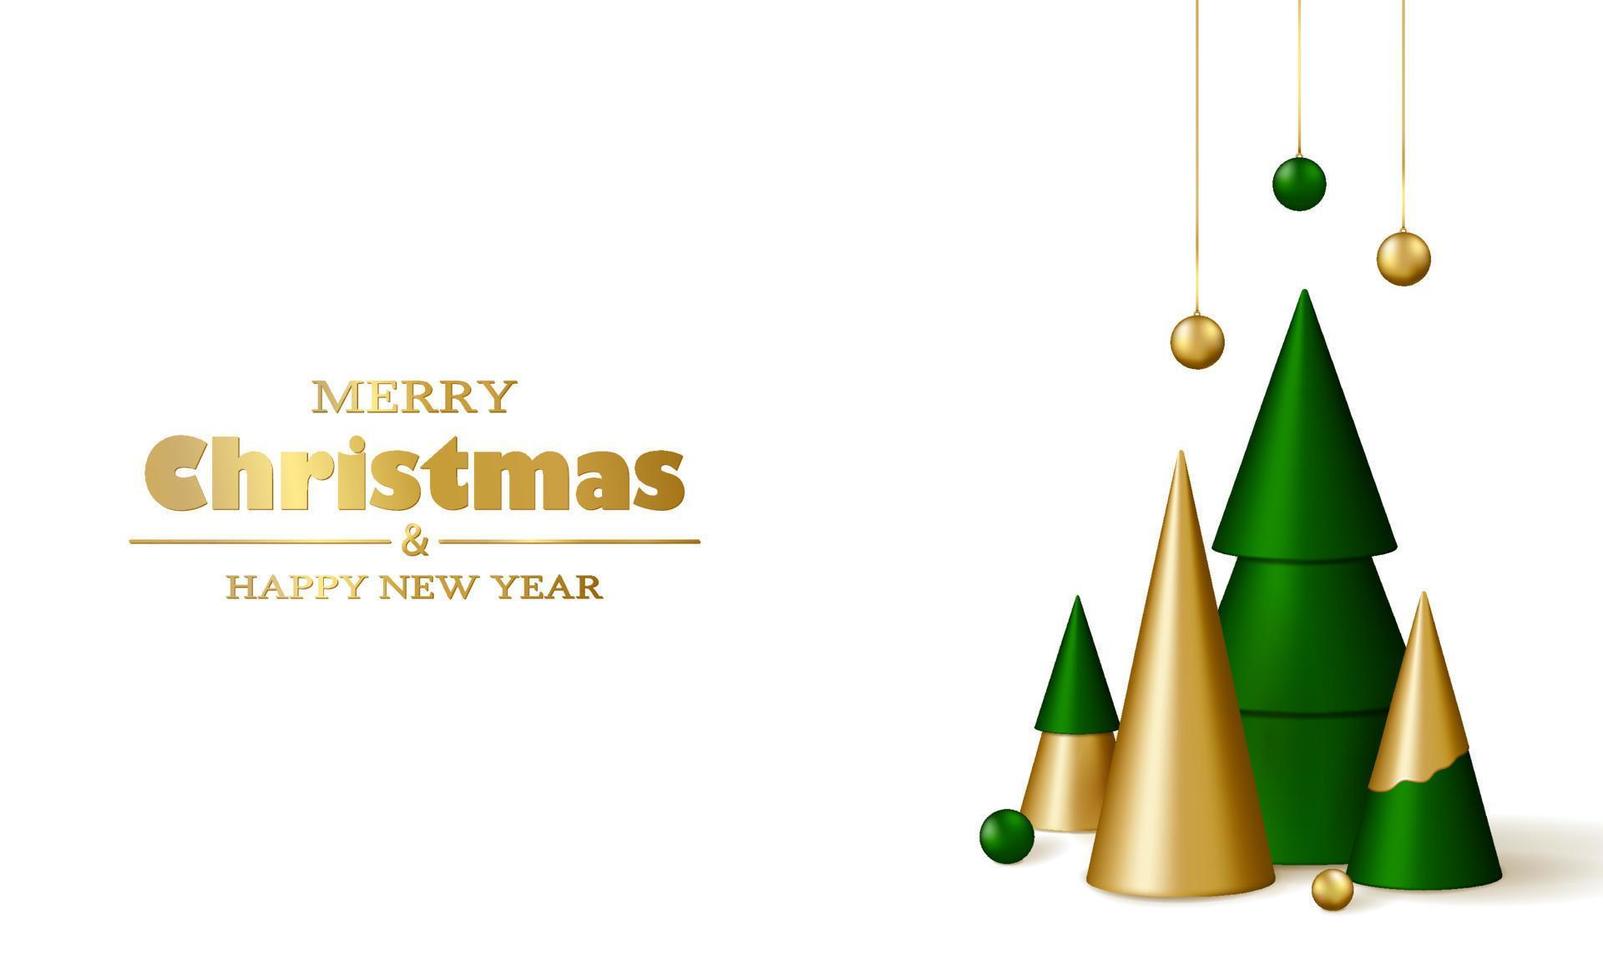 Merry Christmas and Happy New Year background. 3D realistic gold and green decorative Christmas trees and garlands on a white background. vector